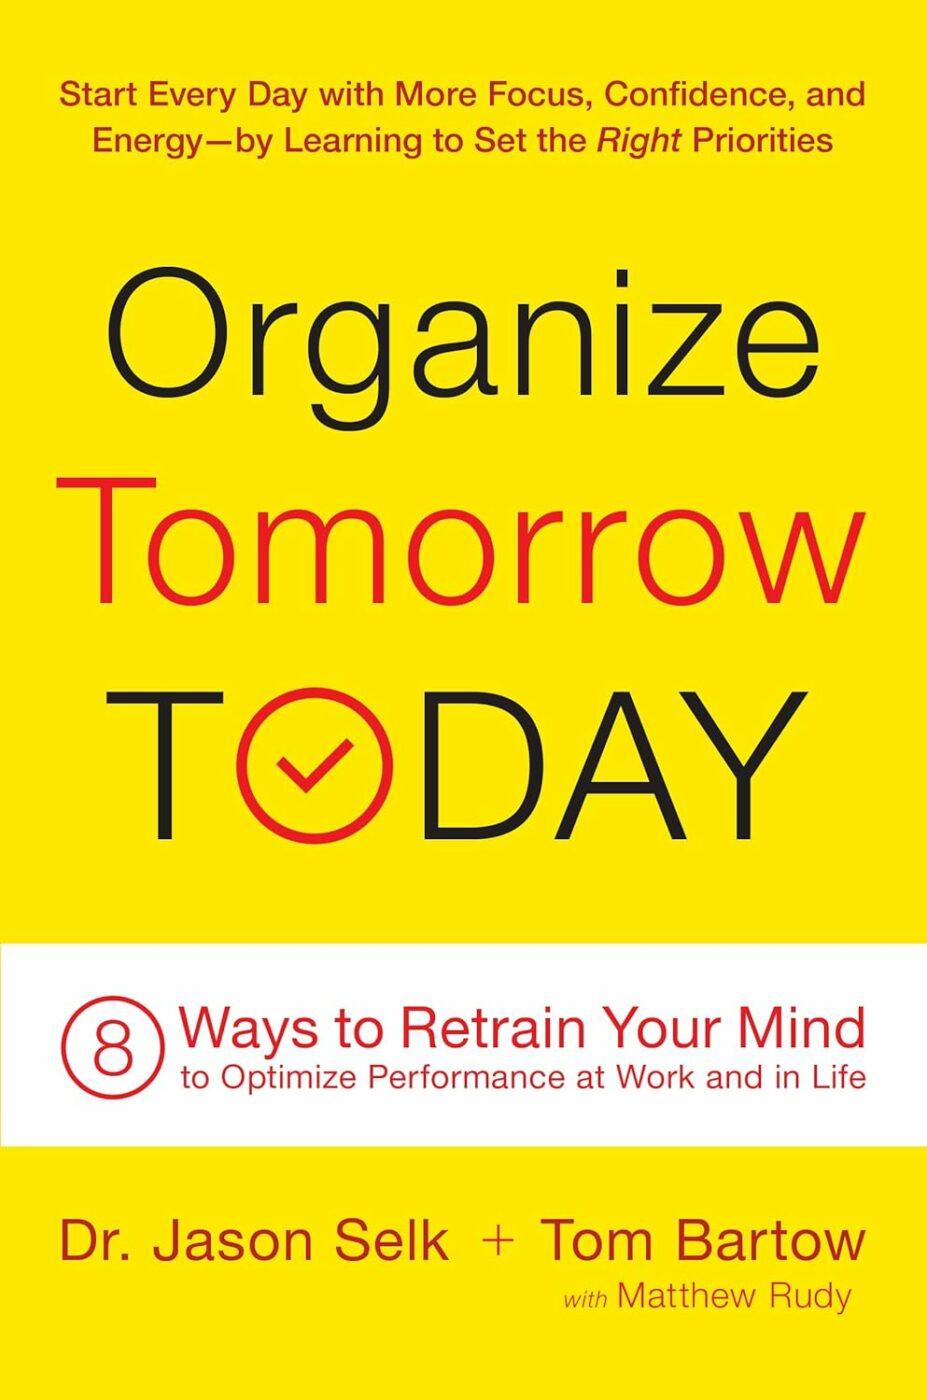 Organize Tomorrow Today: 8 Ways to Retrain Your Mind to Optimize Performance at Work and in Life by Jason Selk, Tom Bartow, and Matthew Rudy